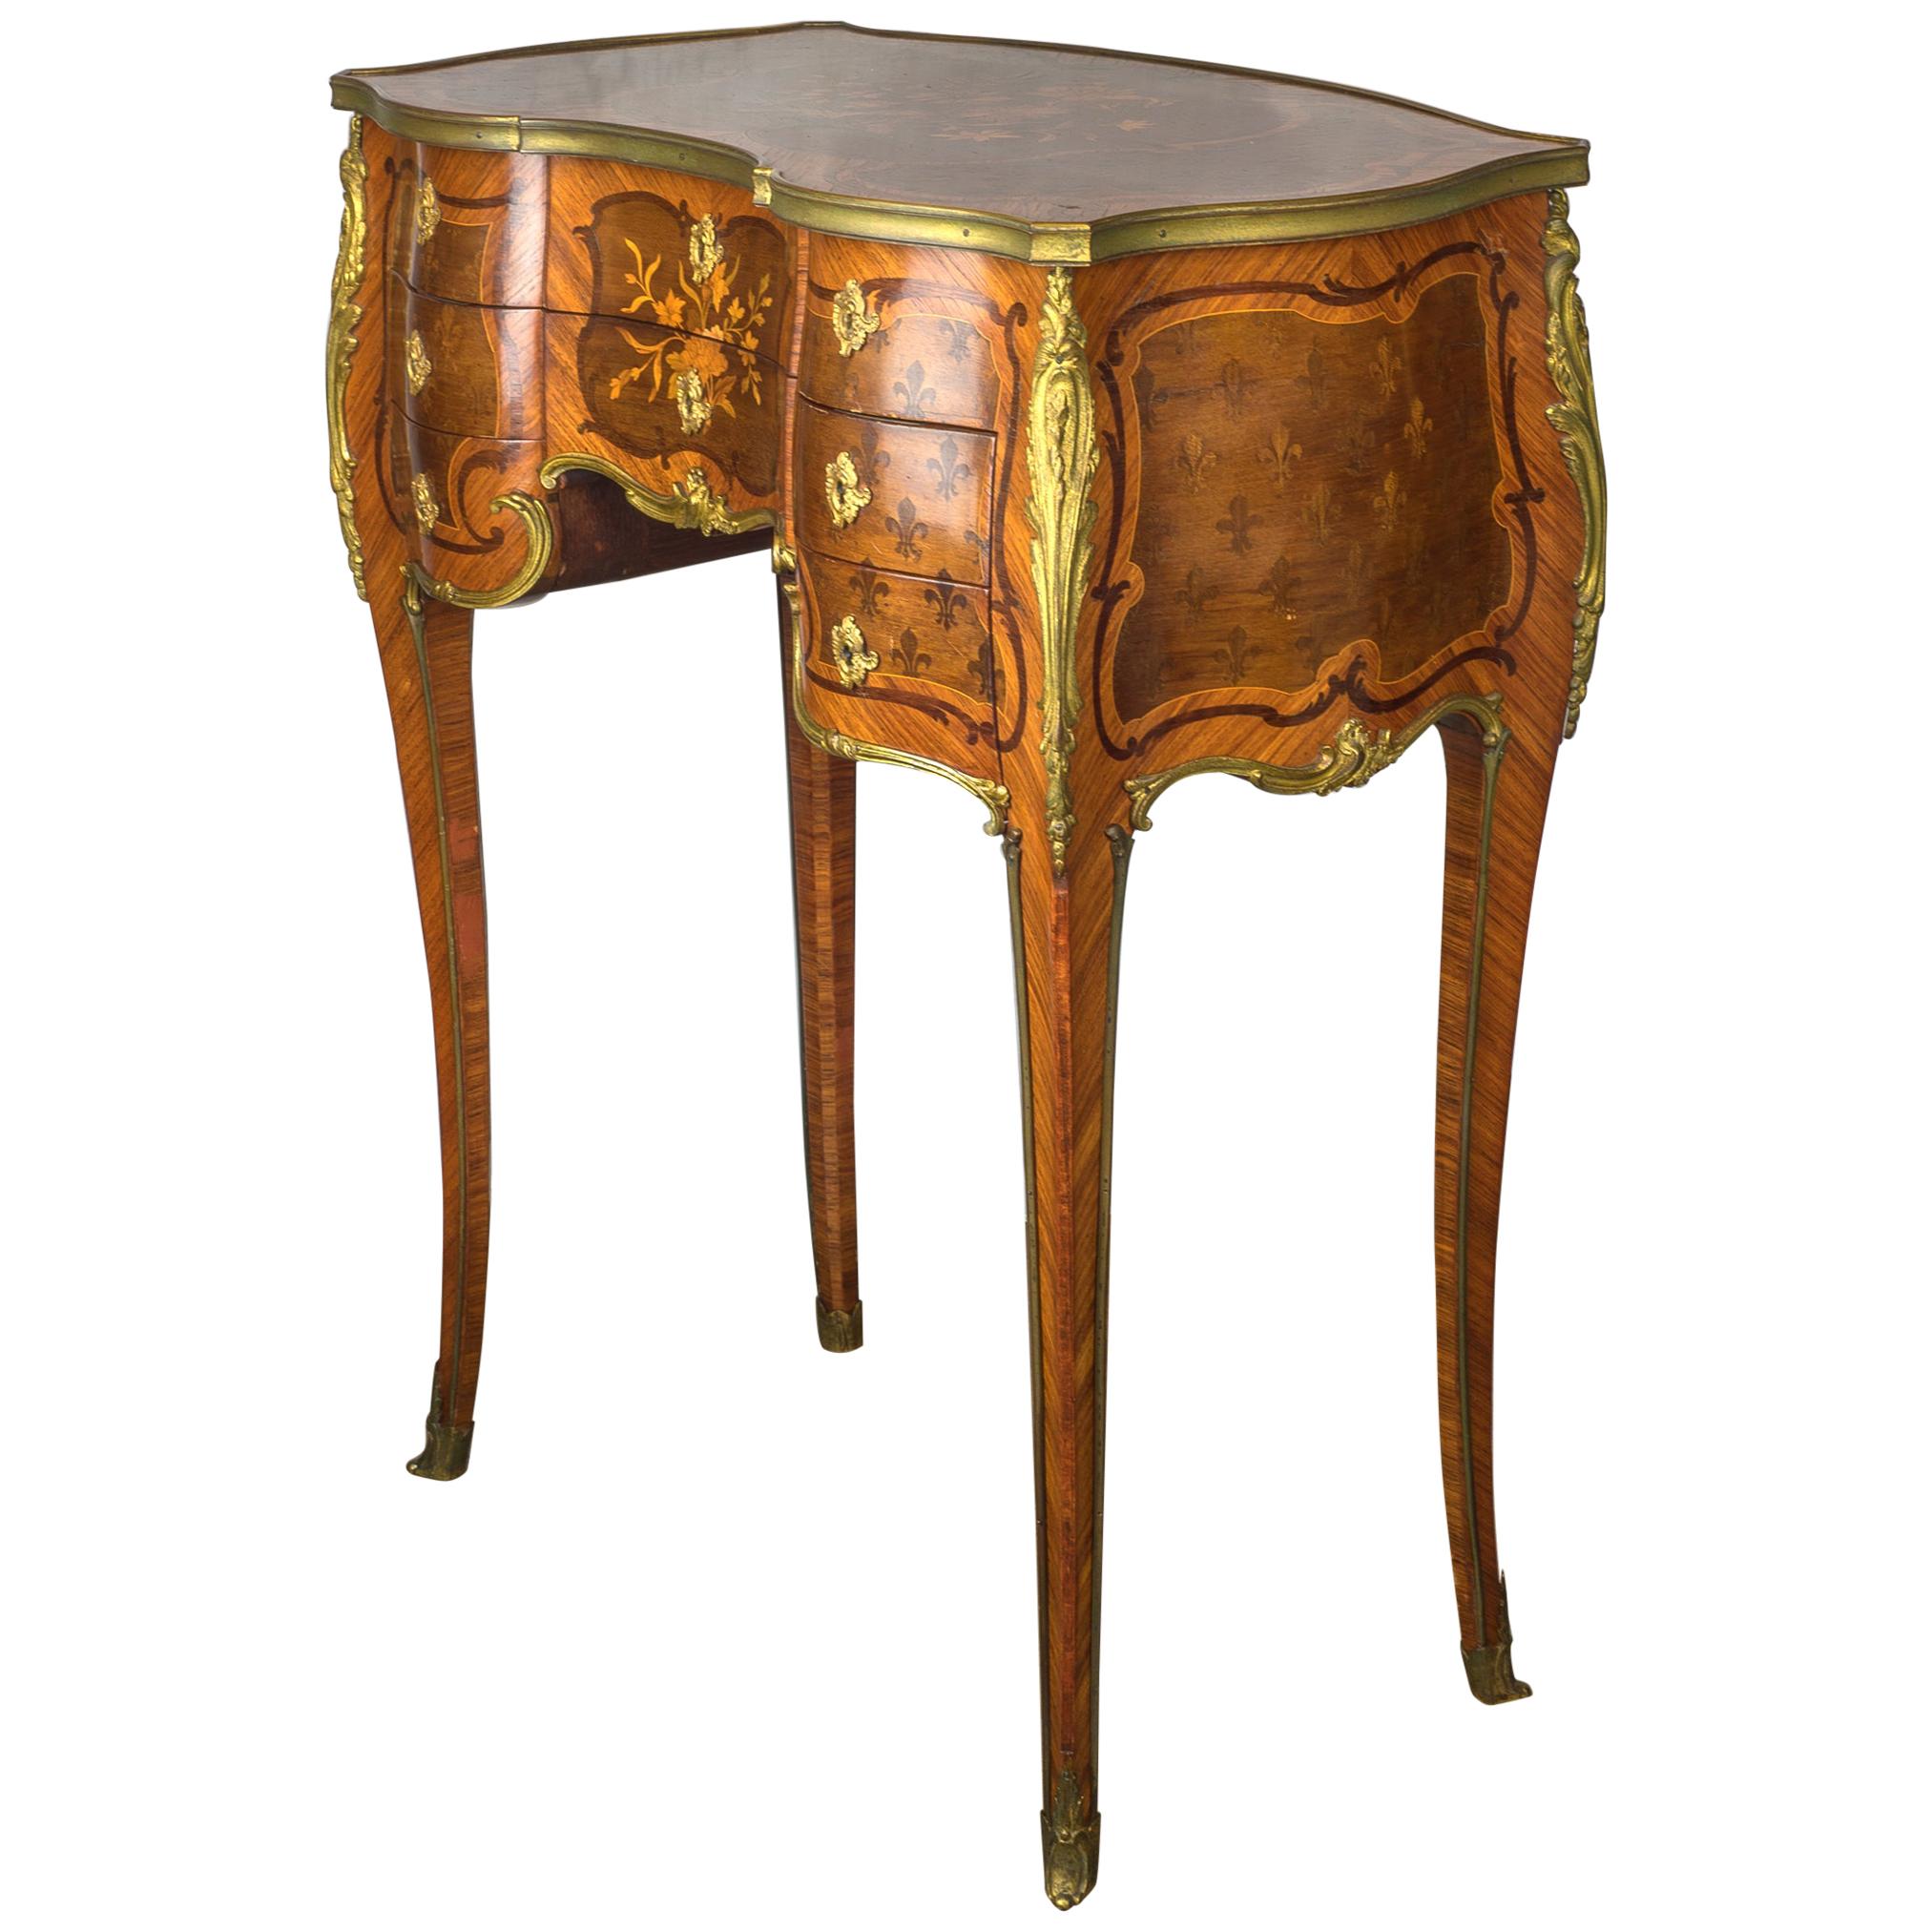 French Kingwood and Mahogany-Veneered Ormolu-Mounted Dressing Table For Sale